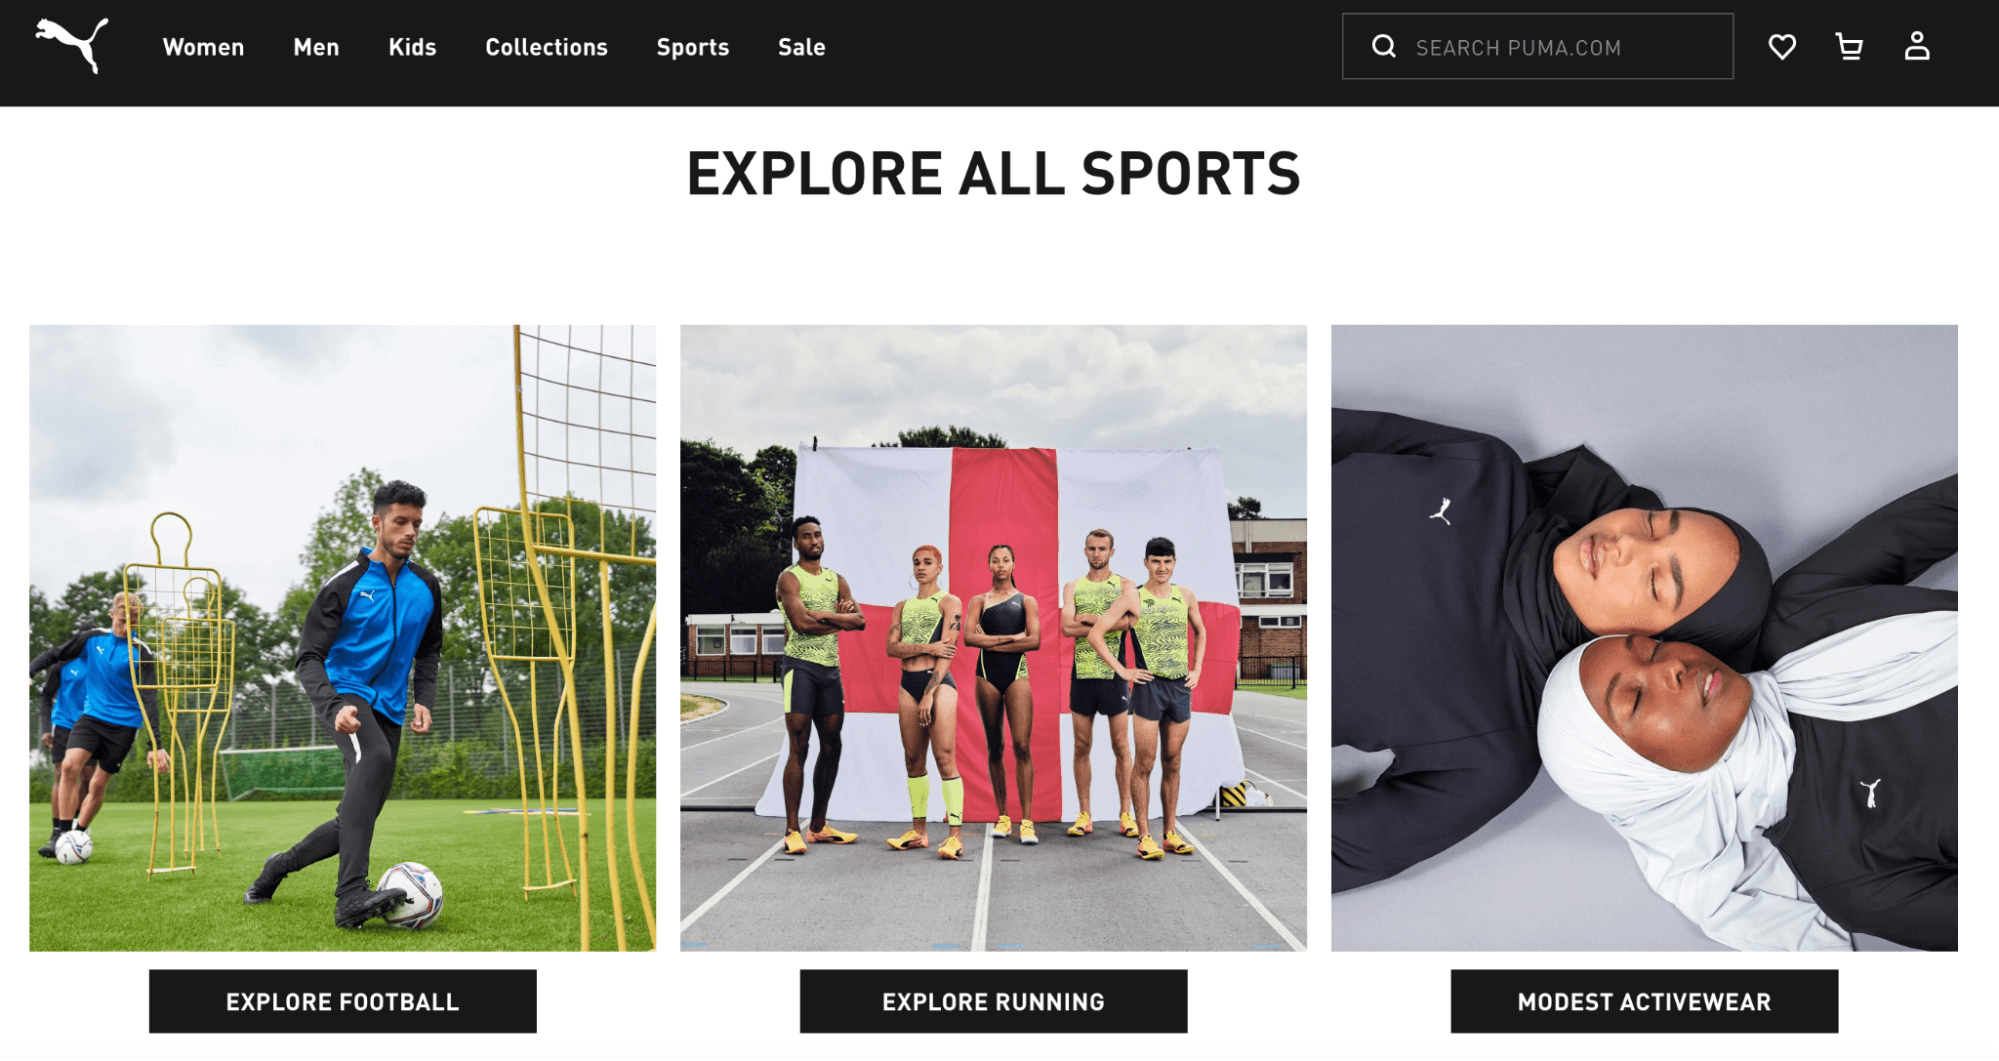 The Sports section on the Puma website